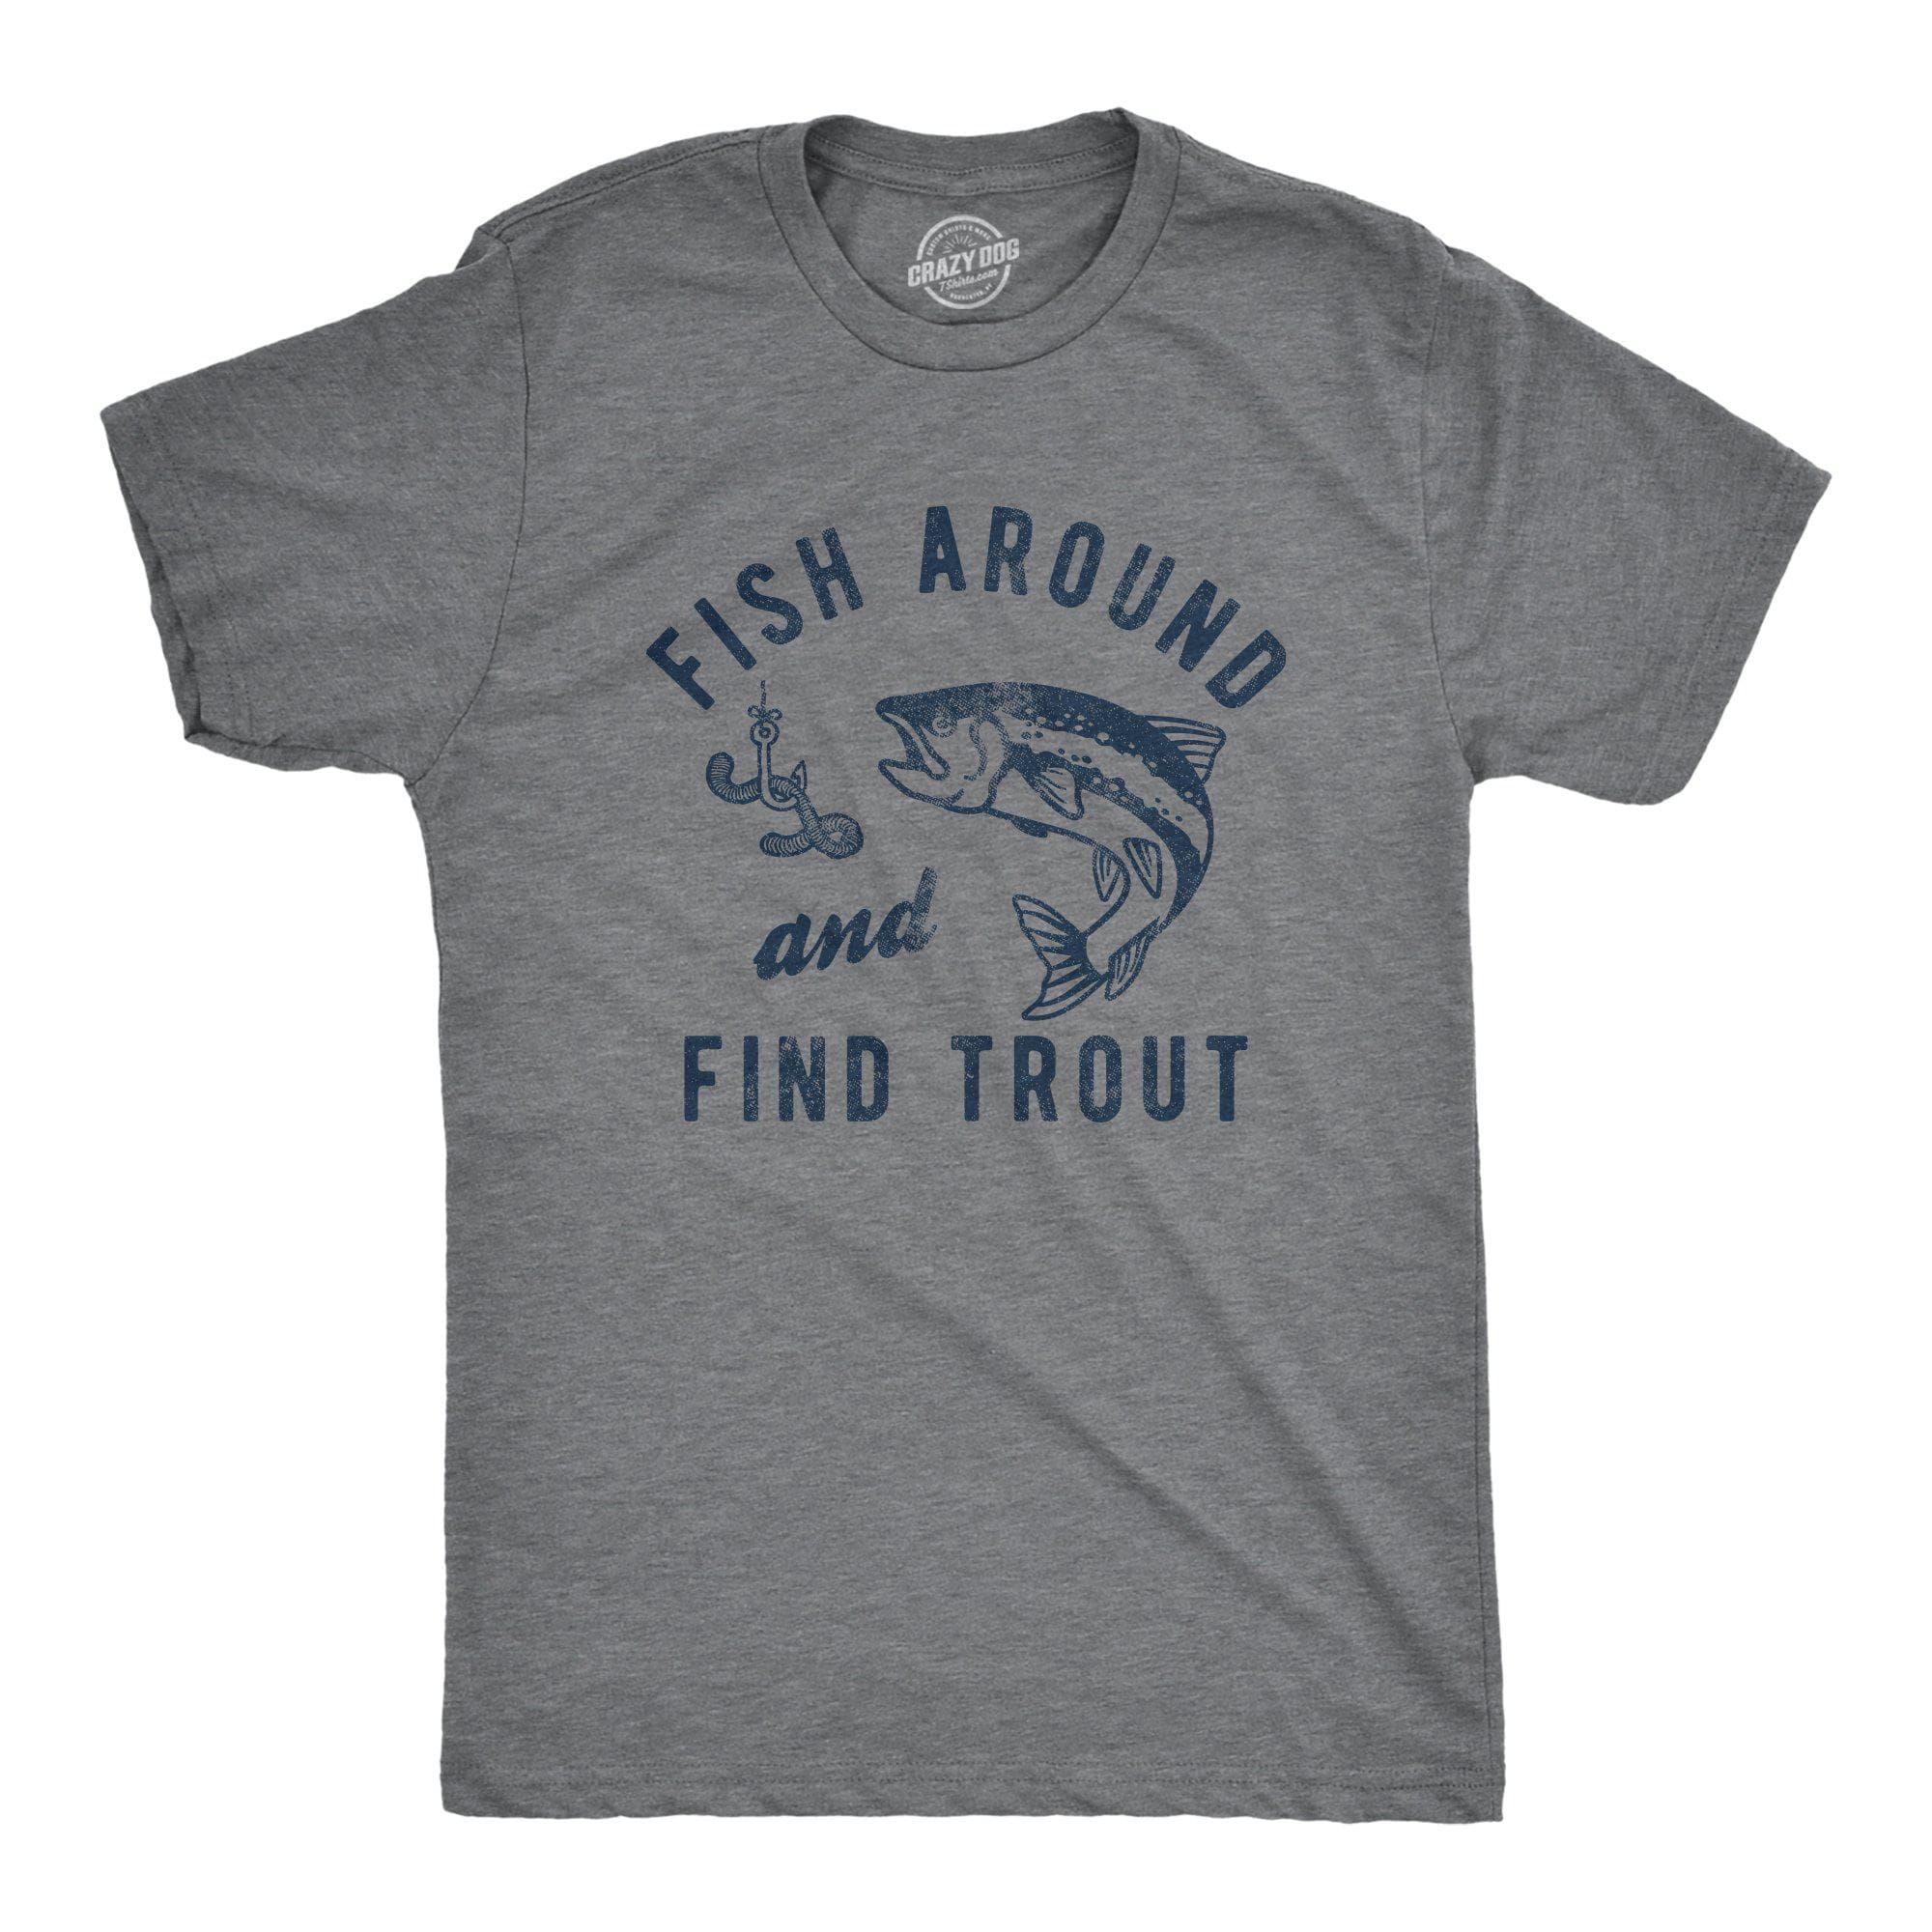 Fish Around And Find Trout Men's Tshirt - Crazy Dog T-Shirts